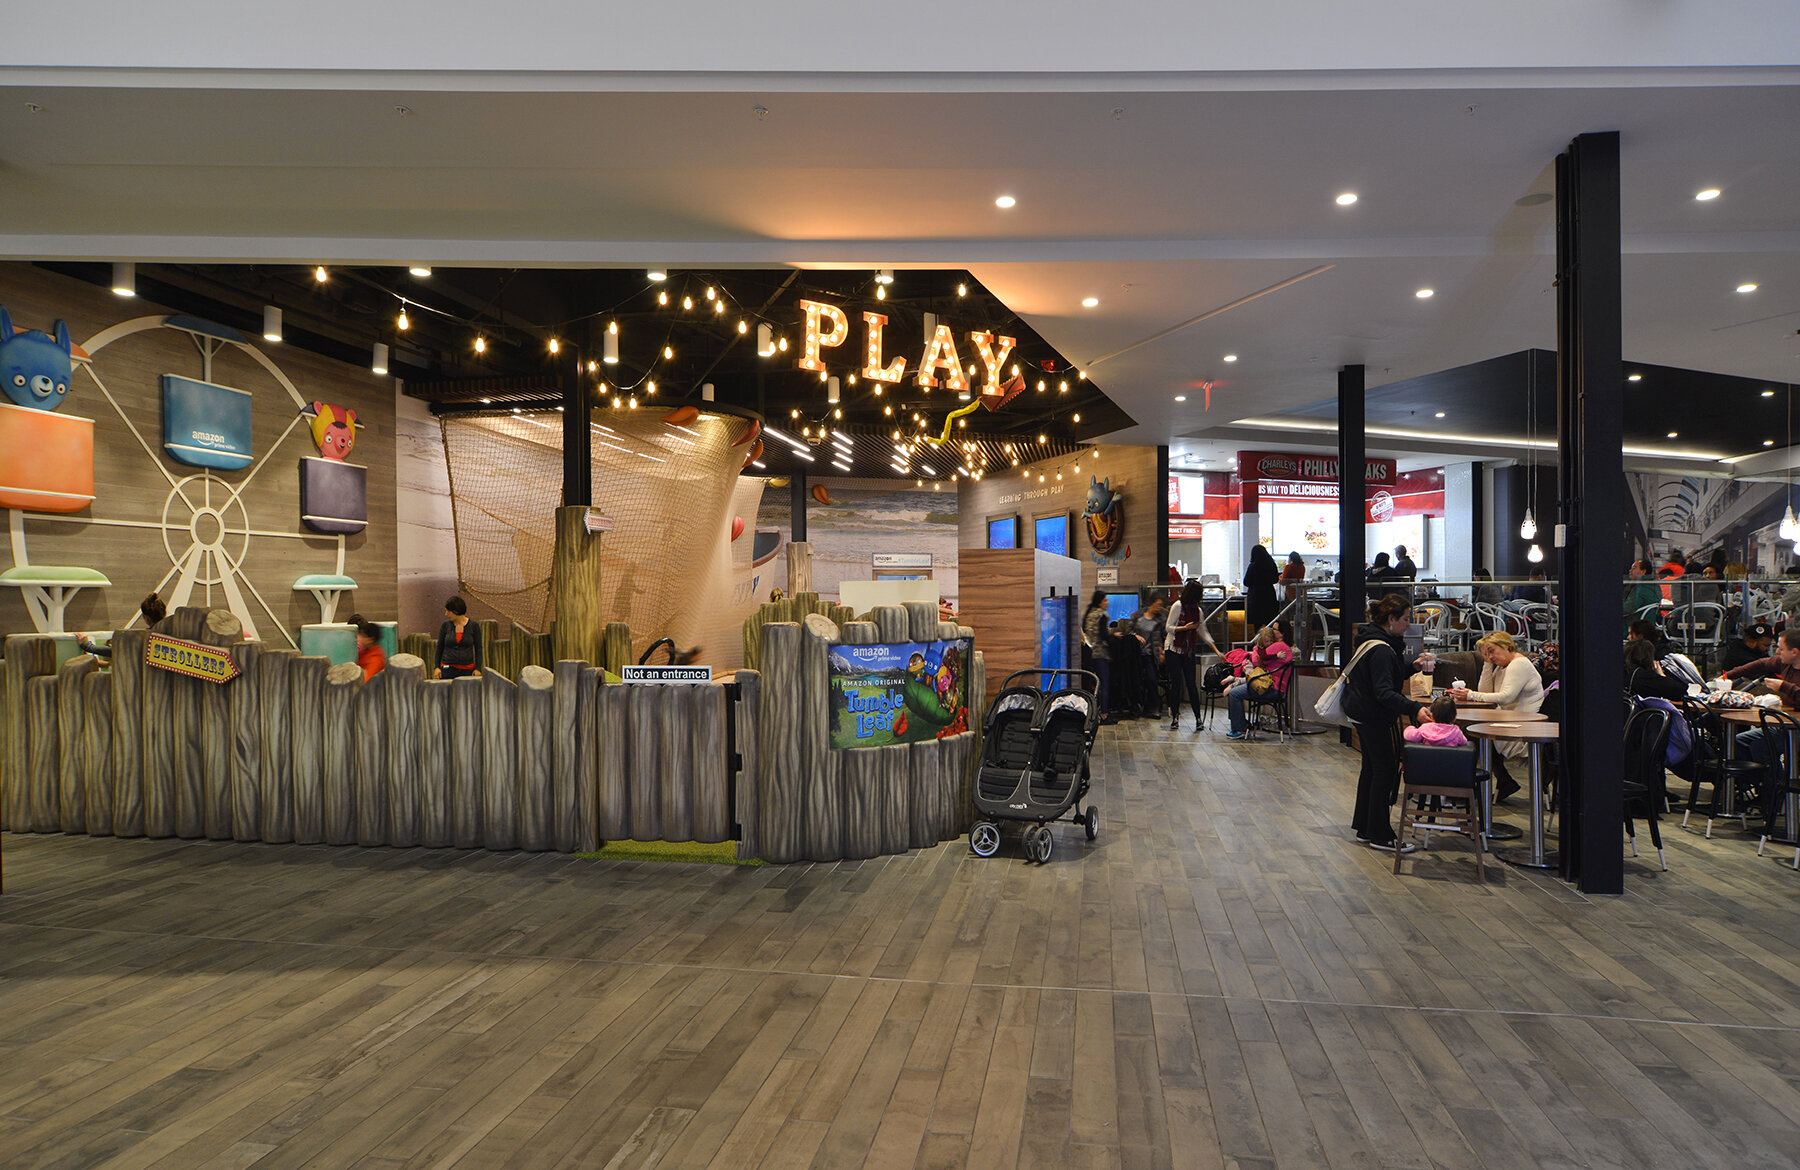 Garden State Plaza's New Food Court and Playspace Will Make Kids